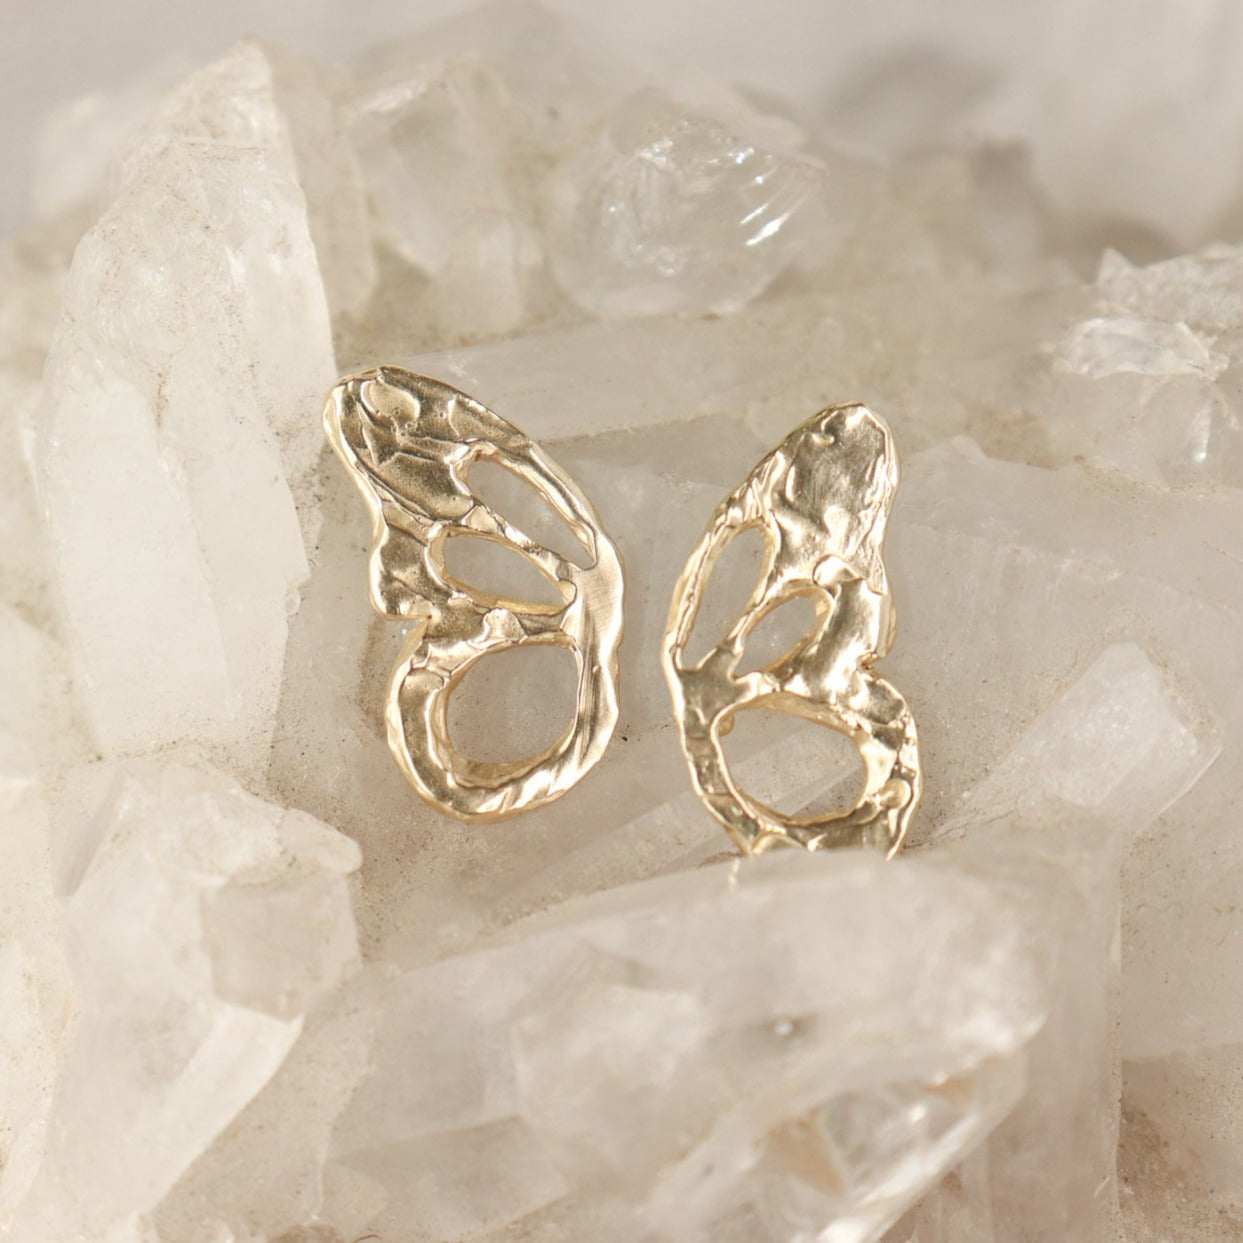 A pair of 14k gold butterfly wing charms, each charm is one part of the wing.